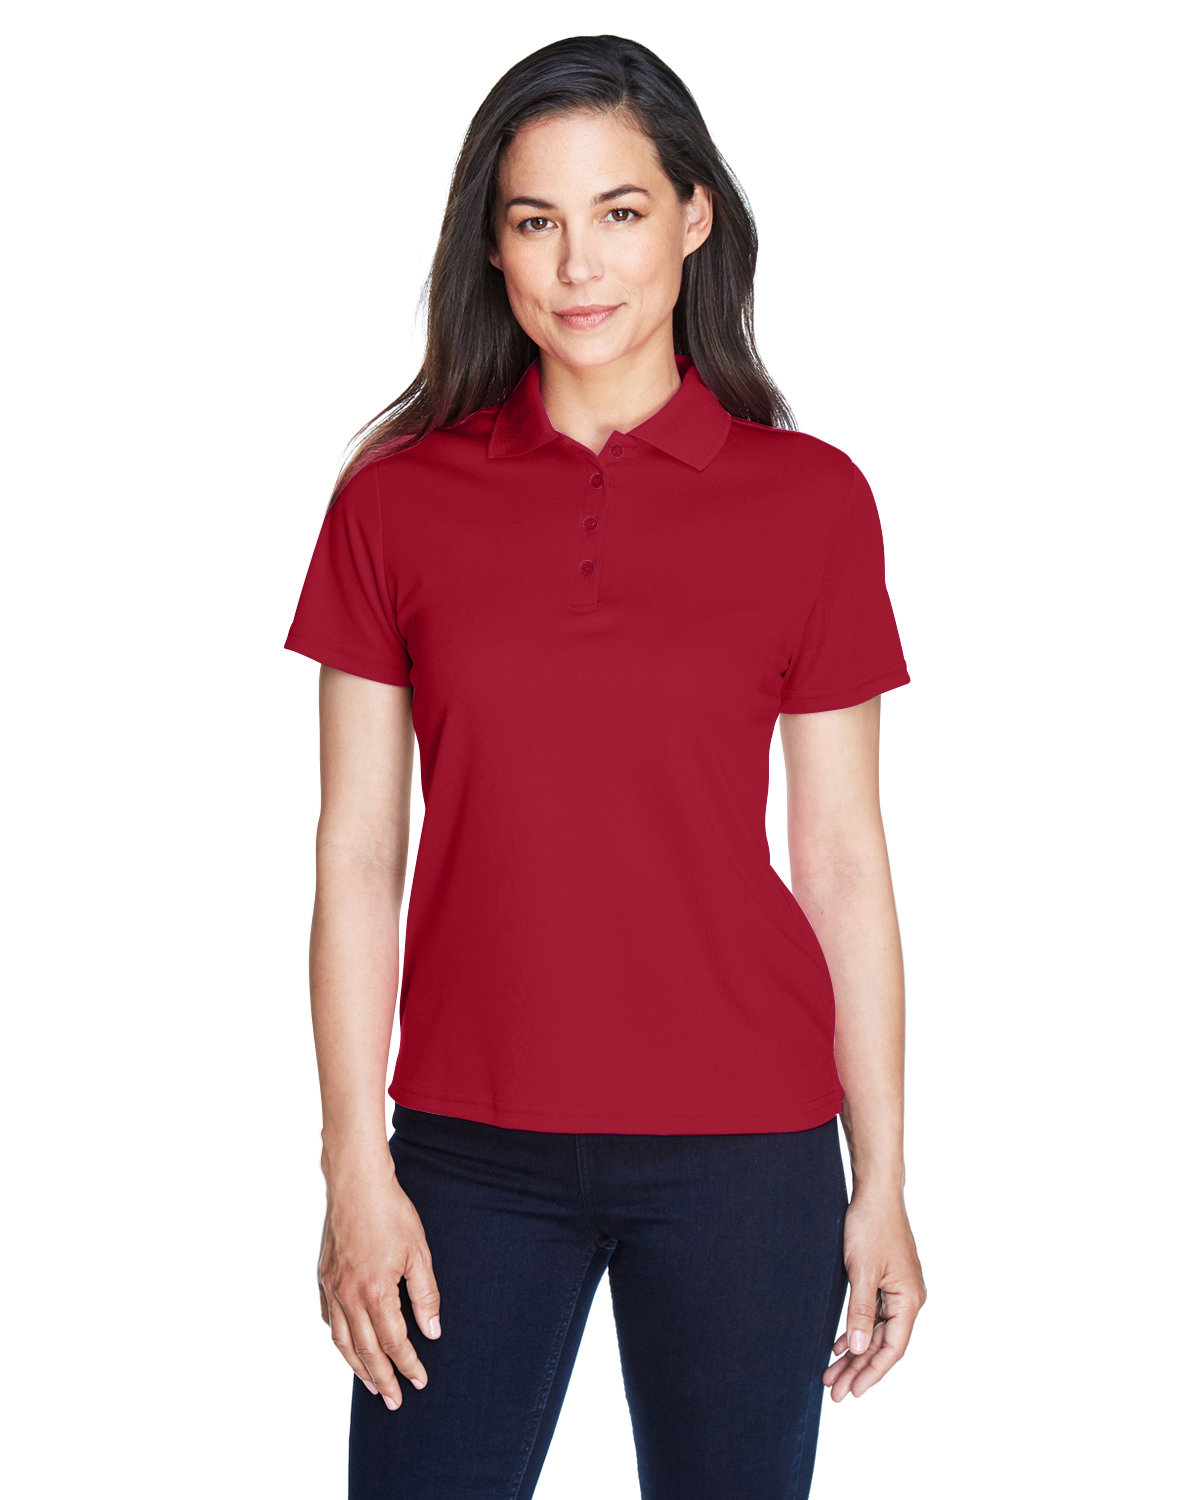 Women's Polyester Polo Shirts at Wholesale Prices